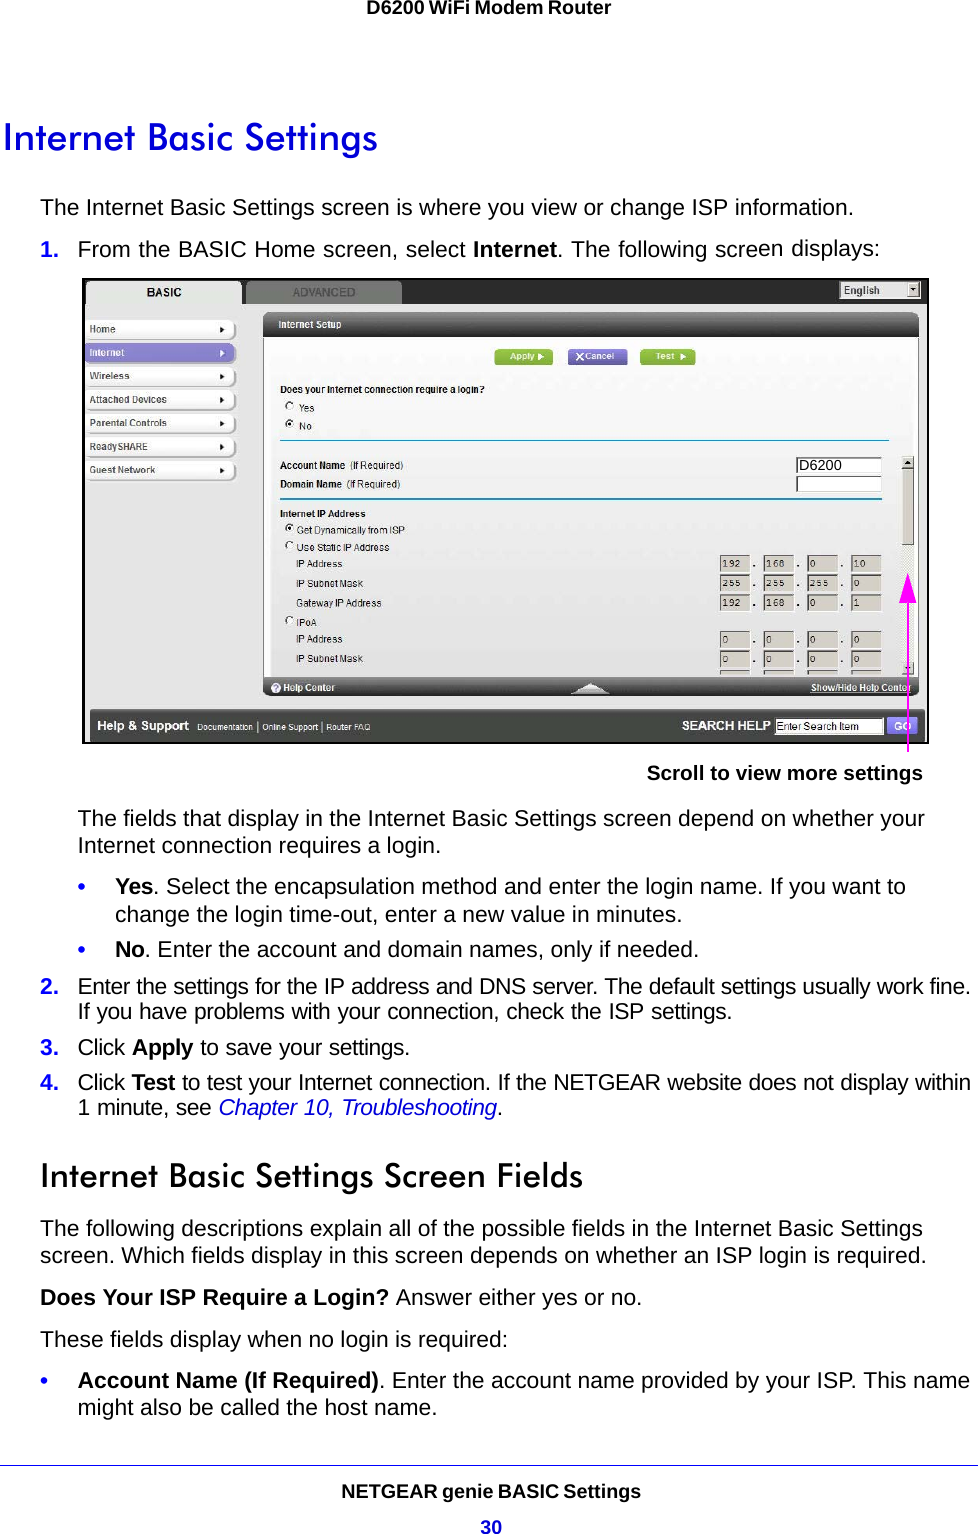 NETGEAR genie BASIC Settings30D6200 WiFi Modem Router Internet Basic SettingsThe Internet Basic Settings screen is where you view or change ISP information. 1. From the BASIC Home screen, select Internet. The following screen displays:Scroll to view more settingsD6200The fields that display in the Internet Basic Settings screen depend on whether your Internet connection requires a login.•Yes. Select the encapsulation method and enter the login name. If you want to change the login time-out, enter a new value in minutes.•No. Enter the account and domain names, only if needed.2. Enter the settings for the IP address and DNS server. The default settings usually work fine. If you have problems with your connection, check the ISP settings.3. Click Apply to save your settings.4. Click Test to test your Internet connection. If the NETGEAR website does not display within 1 minute, see Chapter 10, Troubleshooting.Internet Basic Settings Screen FieldsThe following descriptions explain all of the possible fields in the Internet Basic Settings screen. Which fields display in this screen depends on whether an ISP login is required.Does Your ISP Require a Login? Answer either yes or no.These fields display when no login is required:•Account Name (If Required). Enter the account name provided by your ISP. This name might also be called the host name.